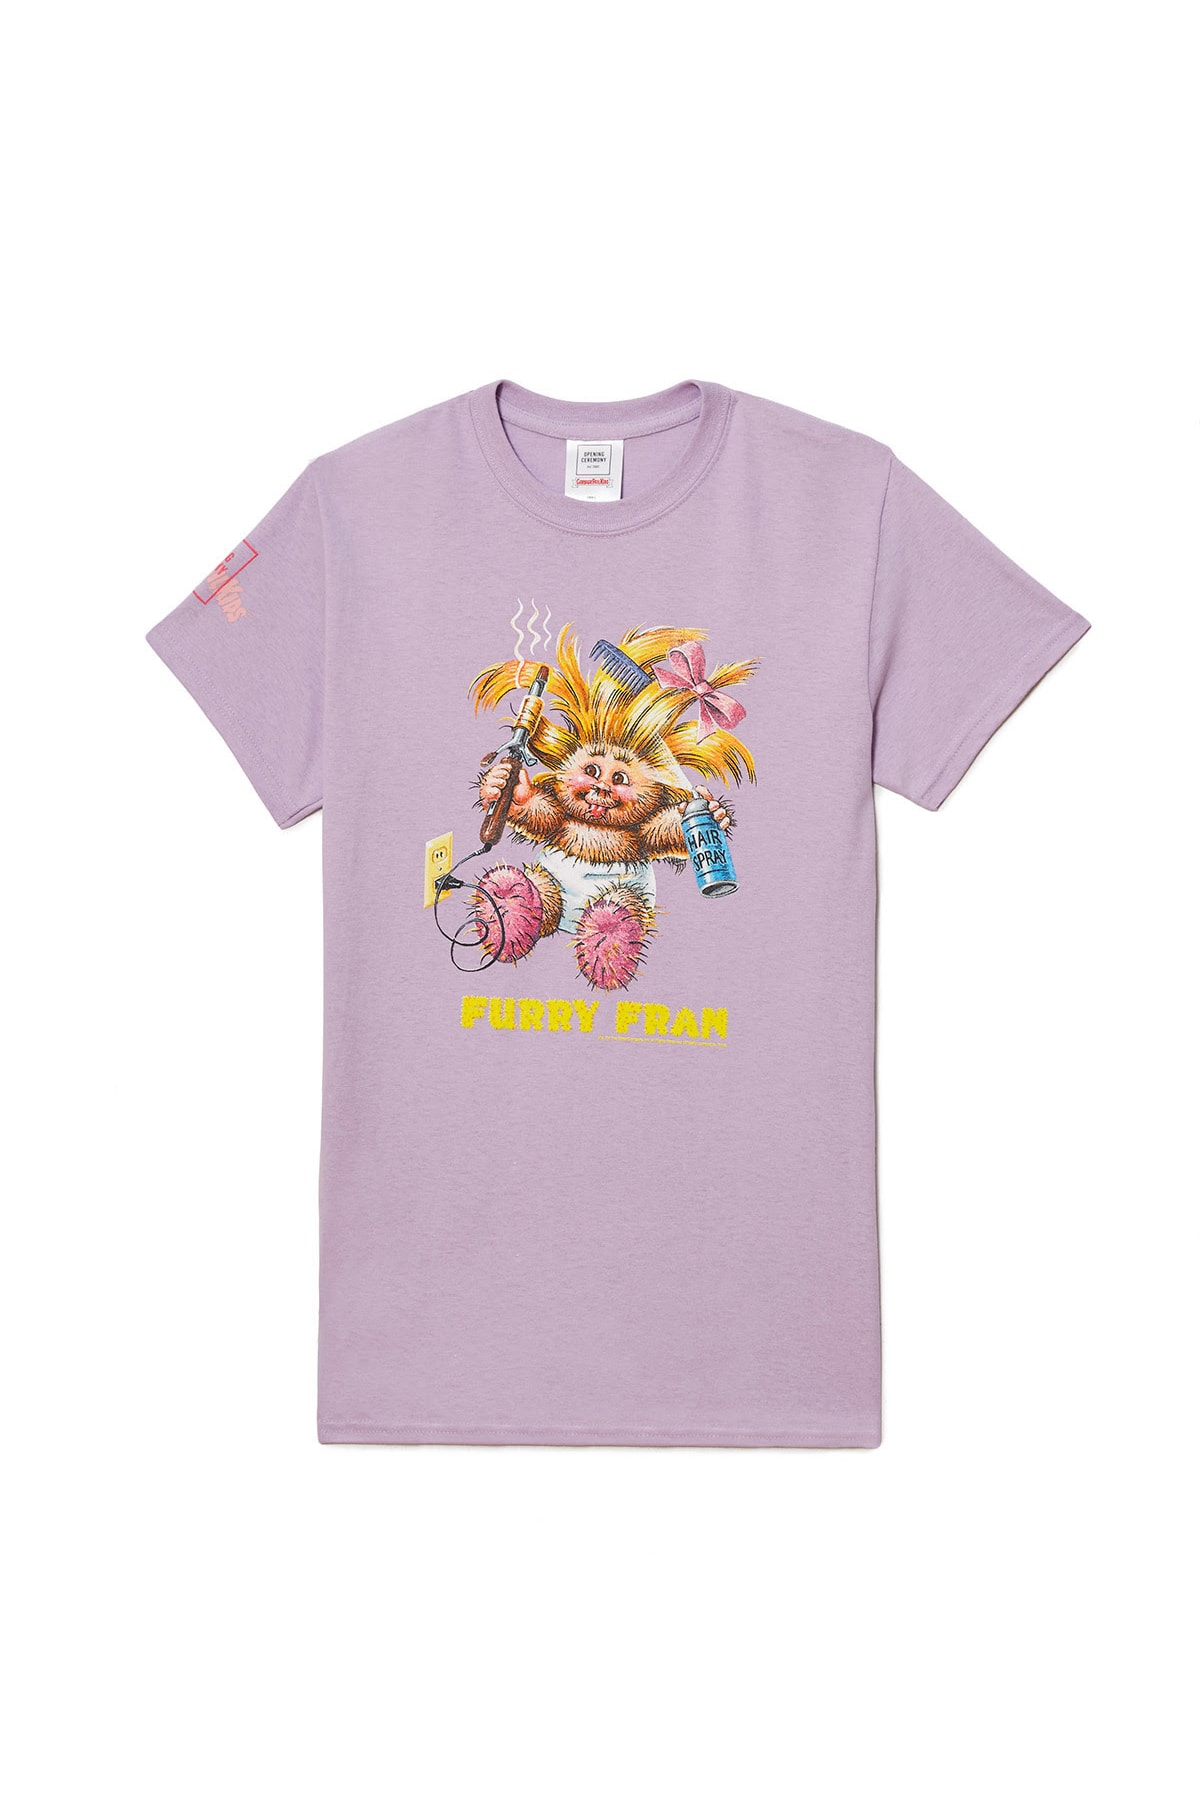 Opening Ceremony garbage pail kids collaboration tee shirt hoodie graphic print july 24 2018 drop release date info buy purchase sale